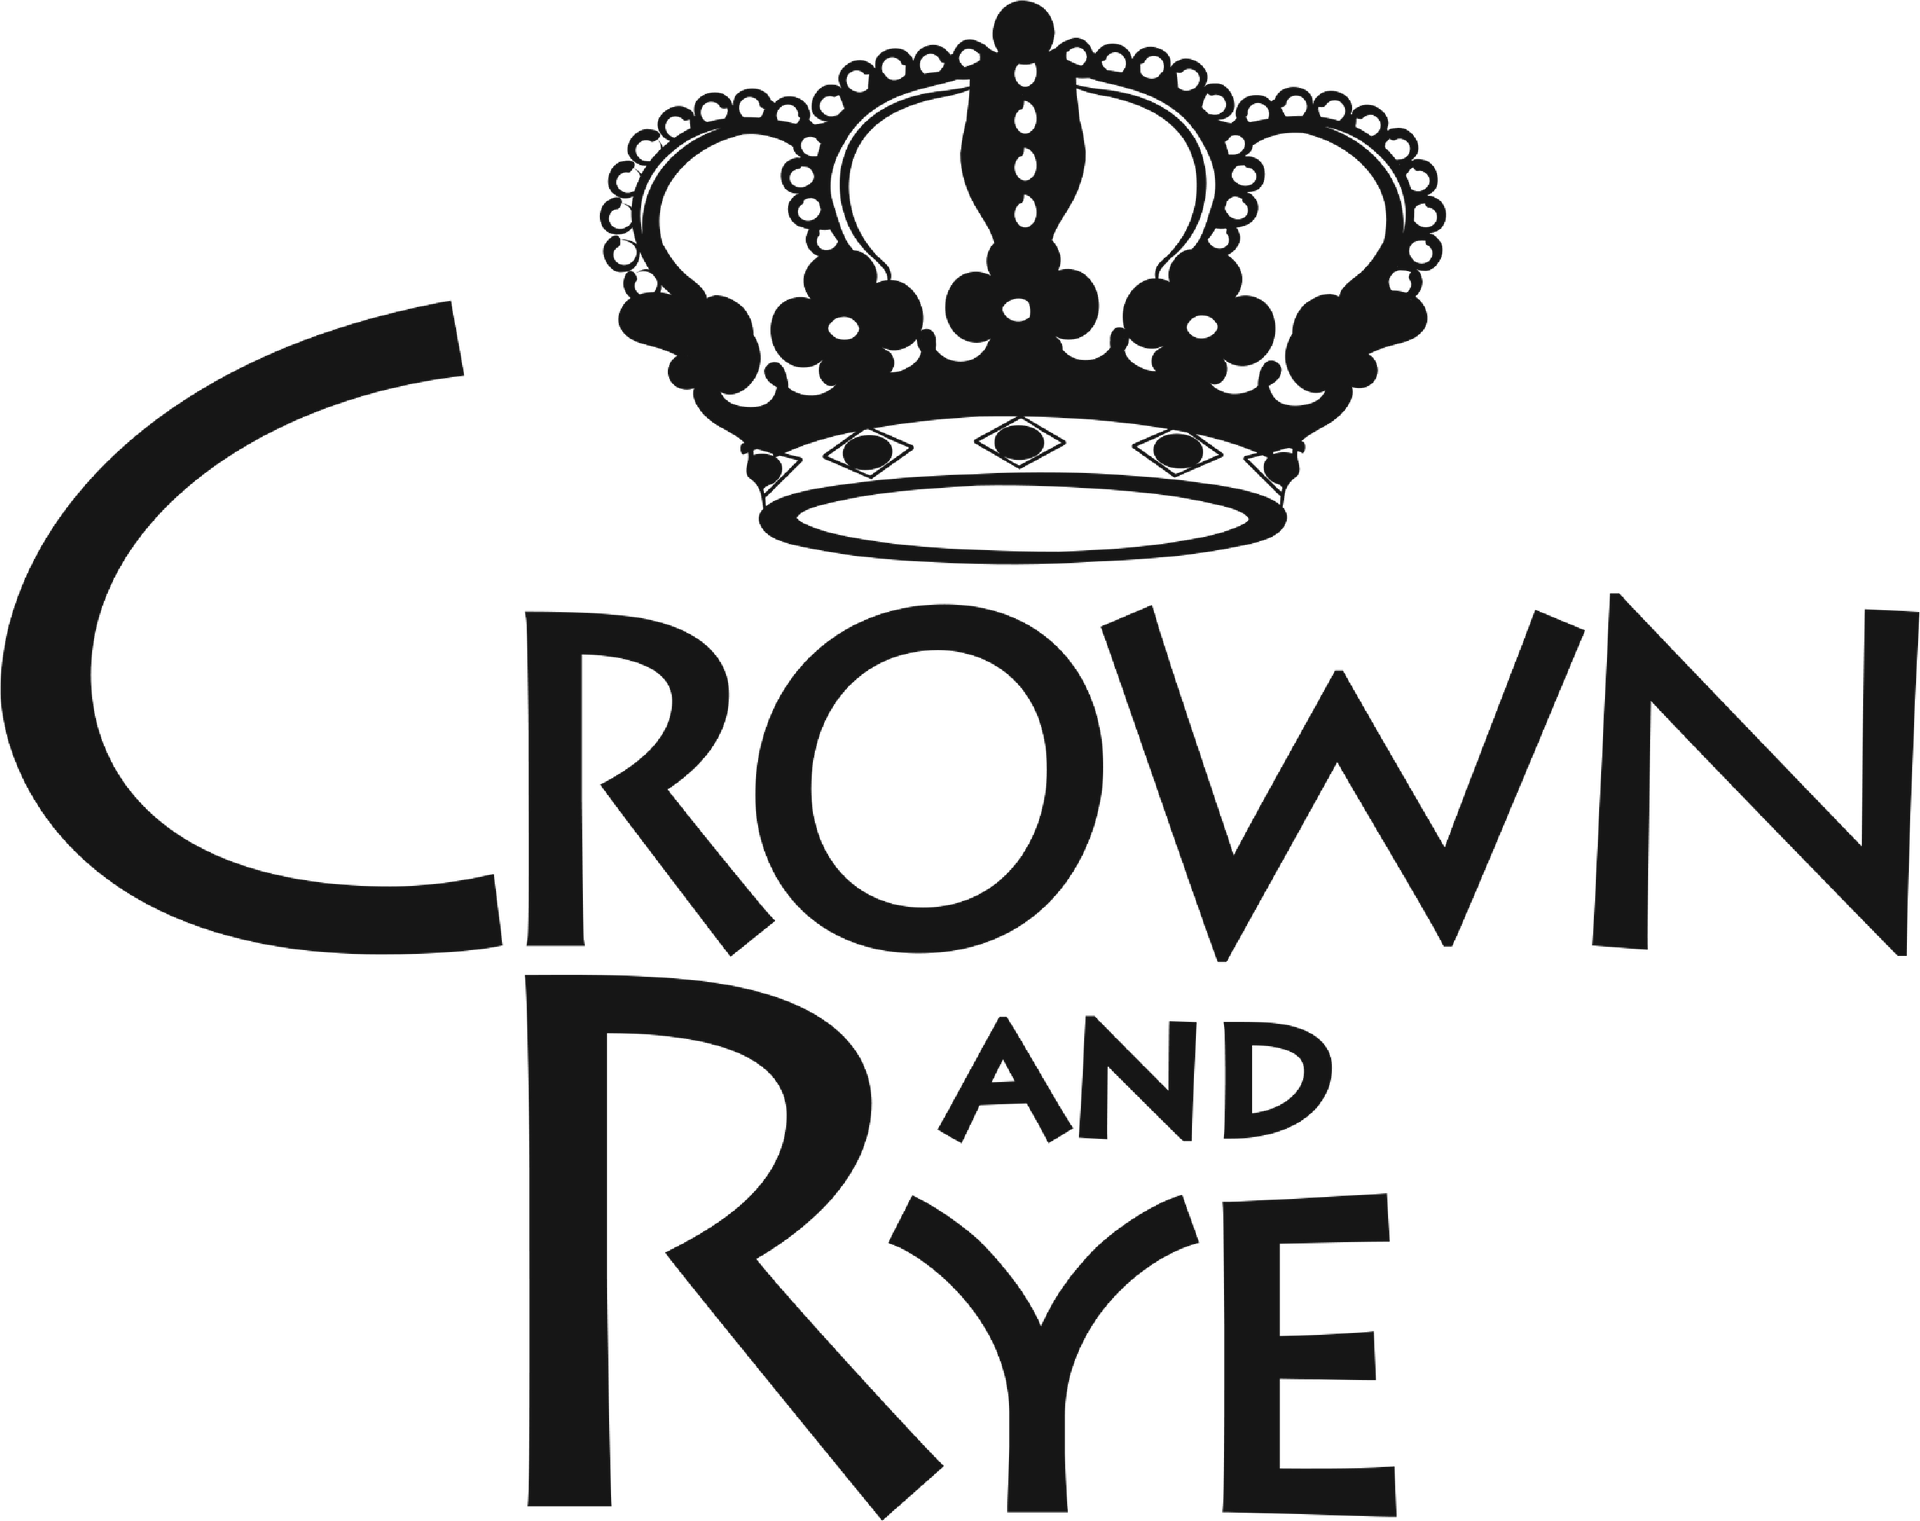 A black and white logo for crown and rye with a crown on it.